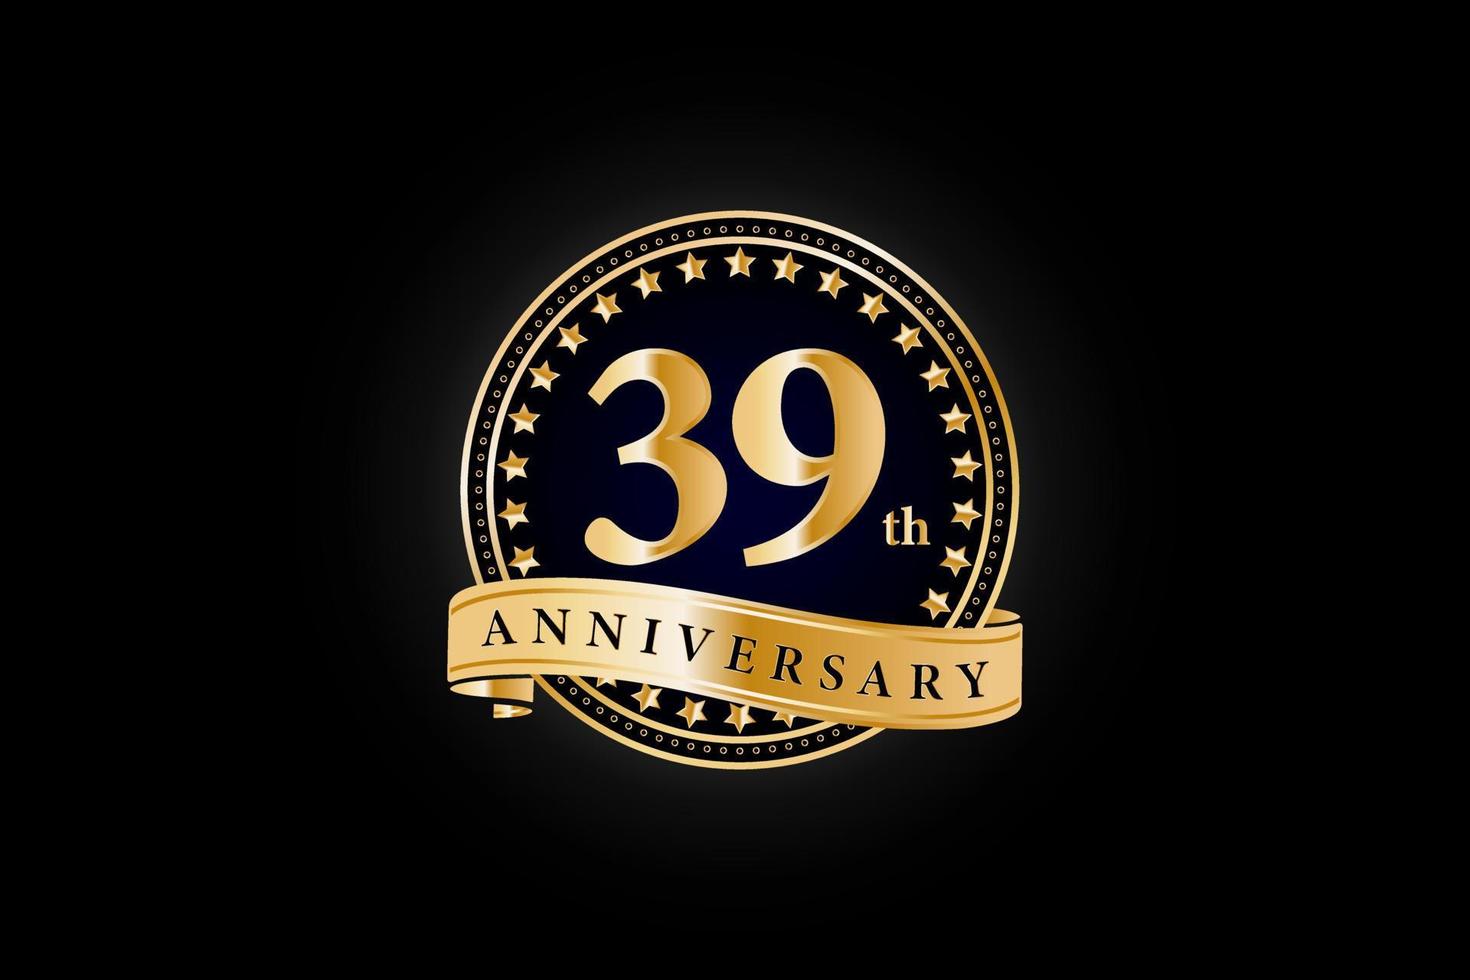 39th Anniversary golden gold logo with ring and gold ribbon isolated on black background, vector design for celebration.